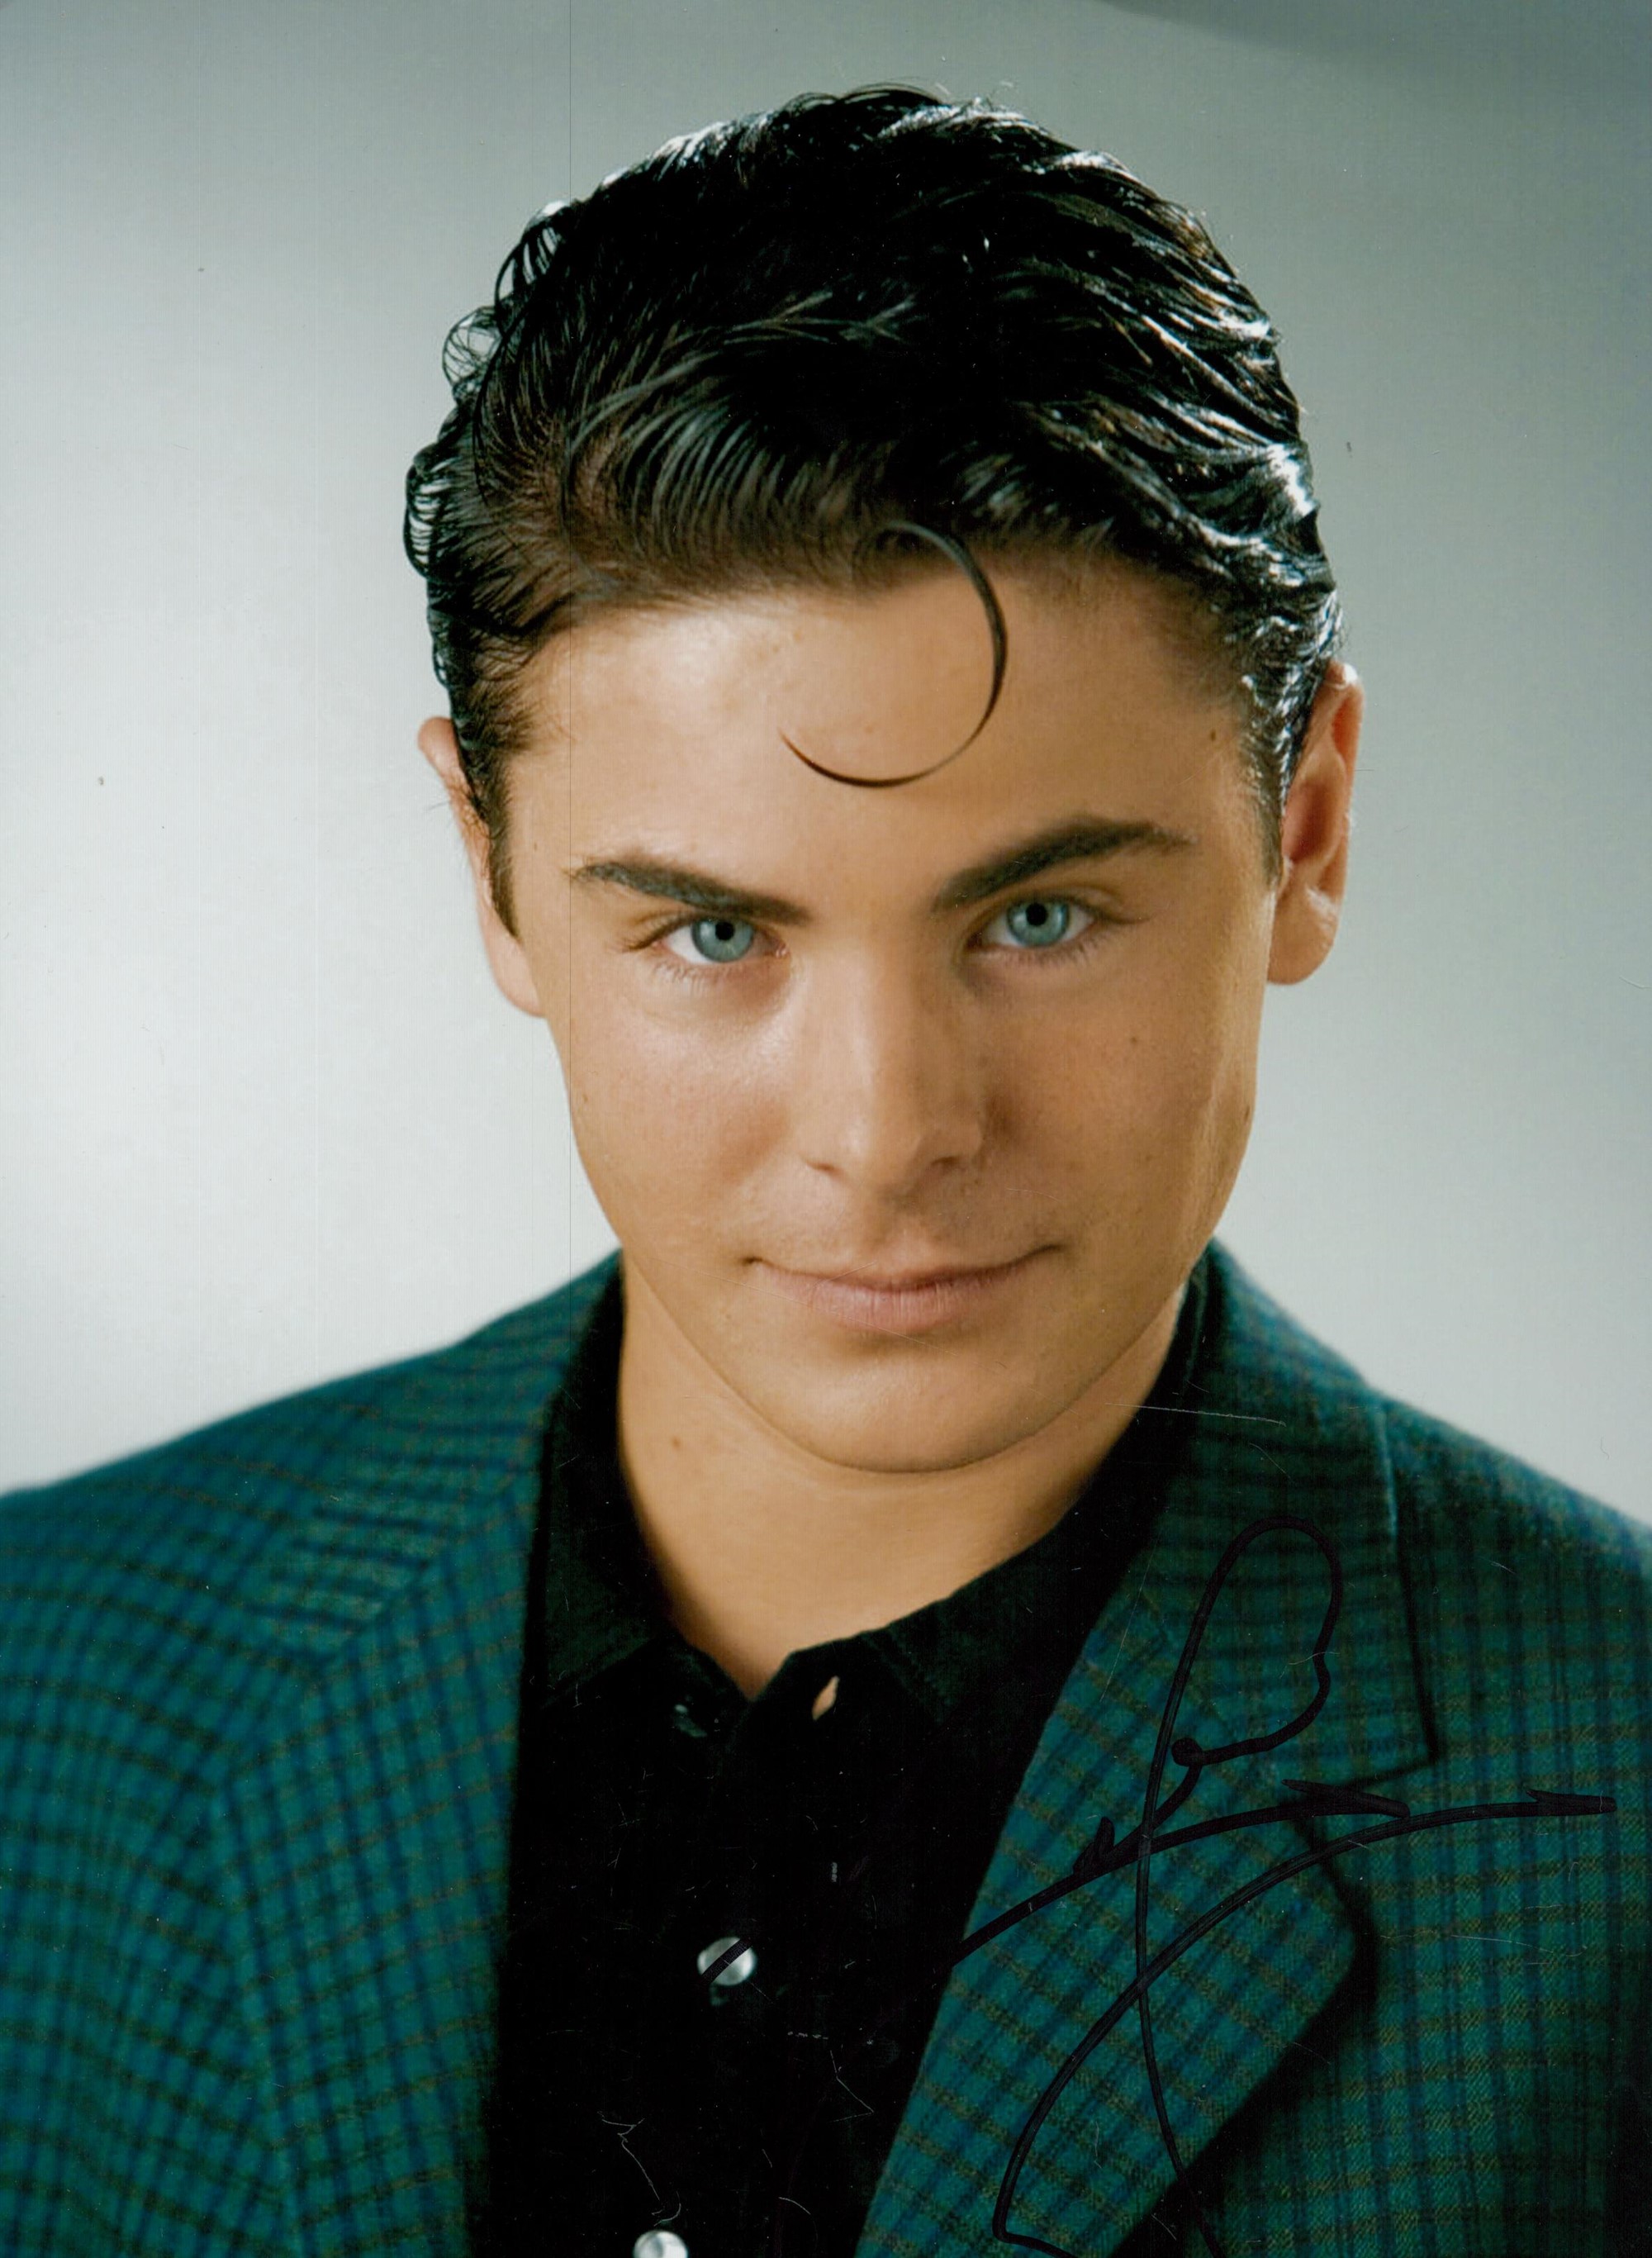 Actor, Zac Efron signed 12x8 inch colour photograph. Efron is well known for roles in High School